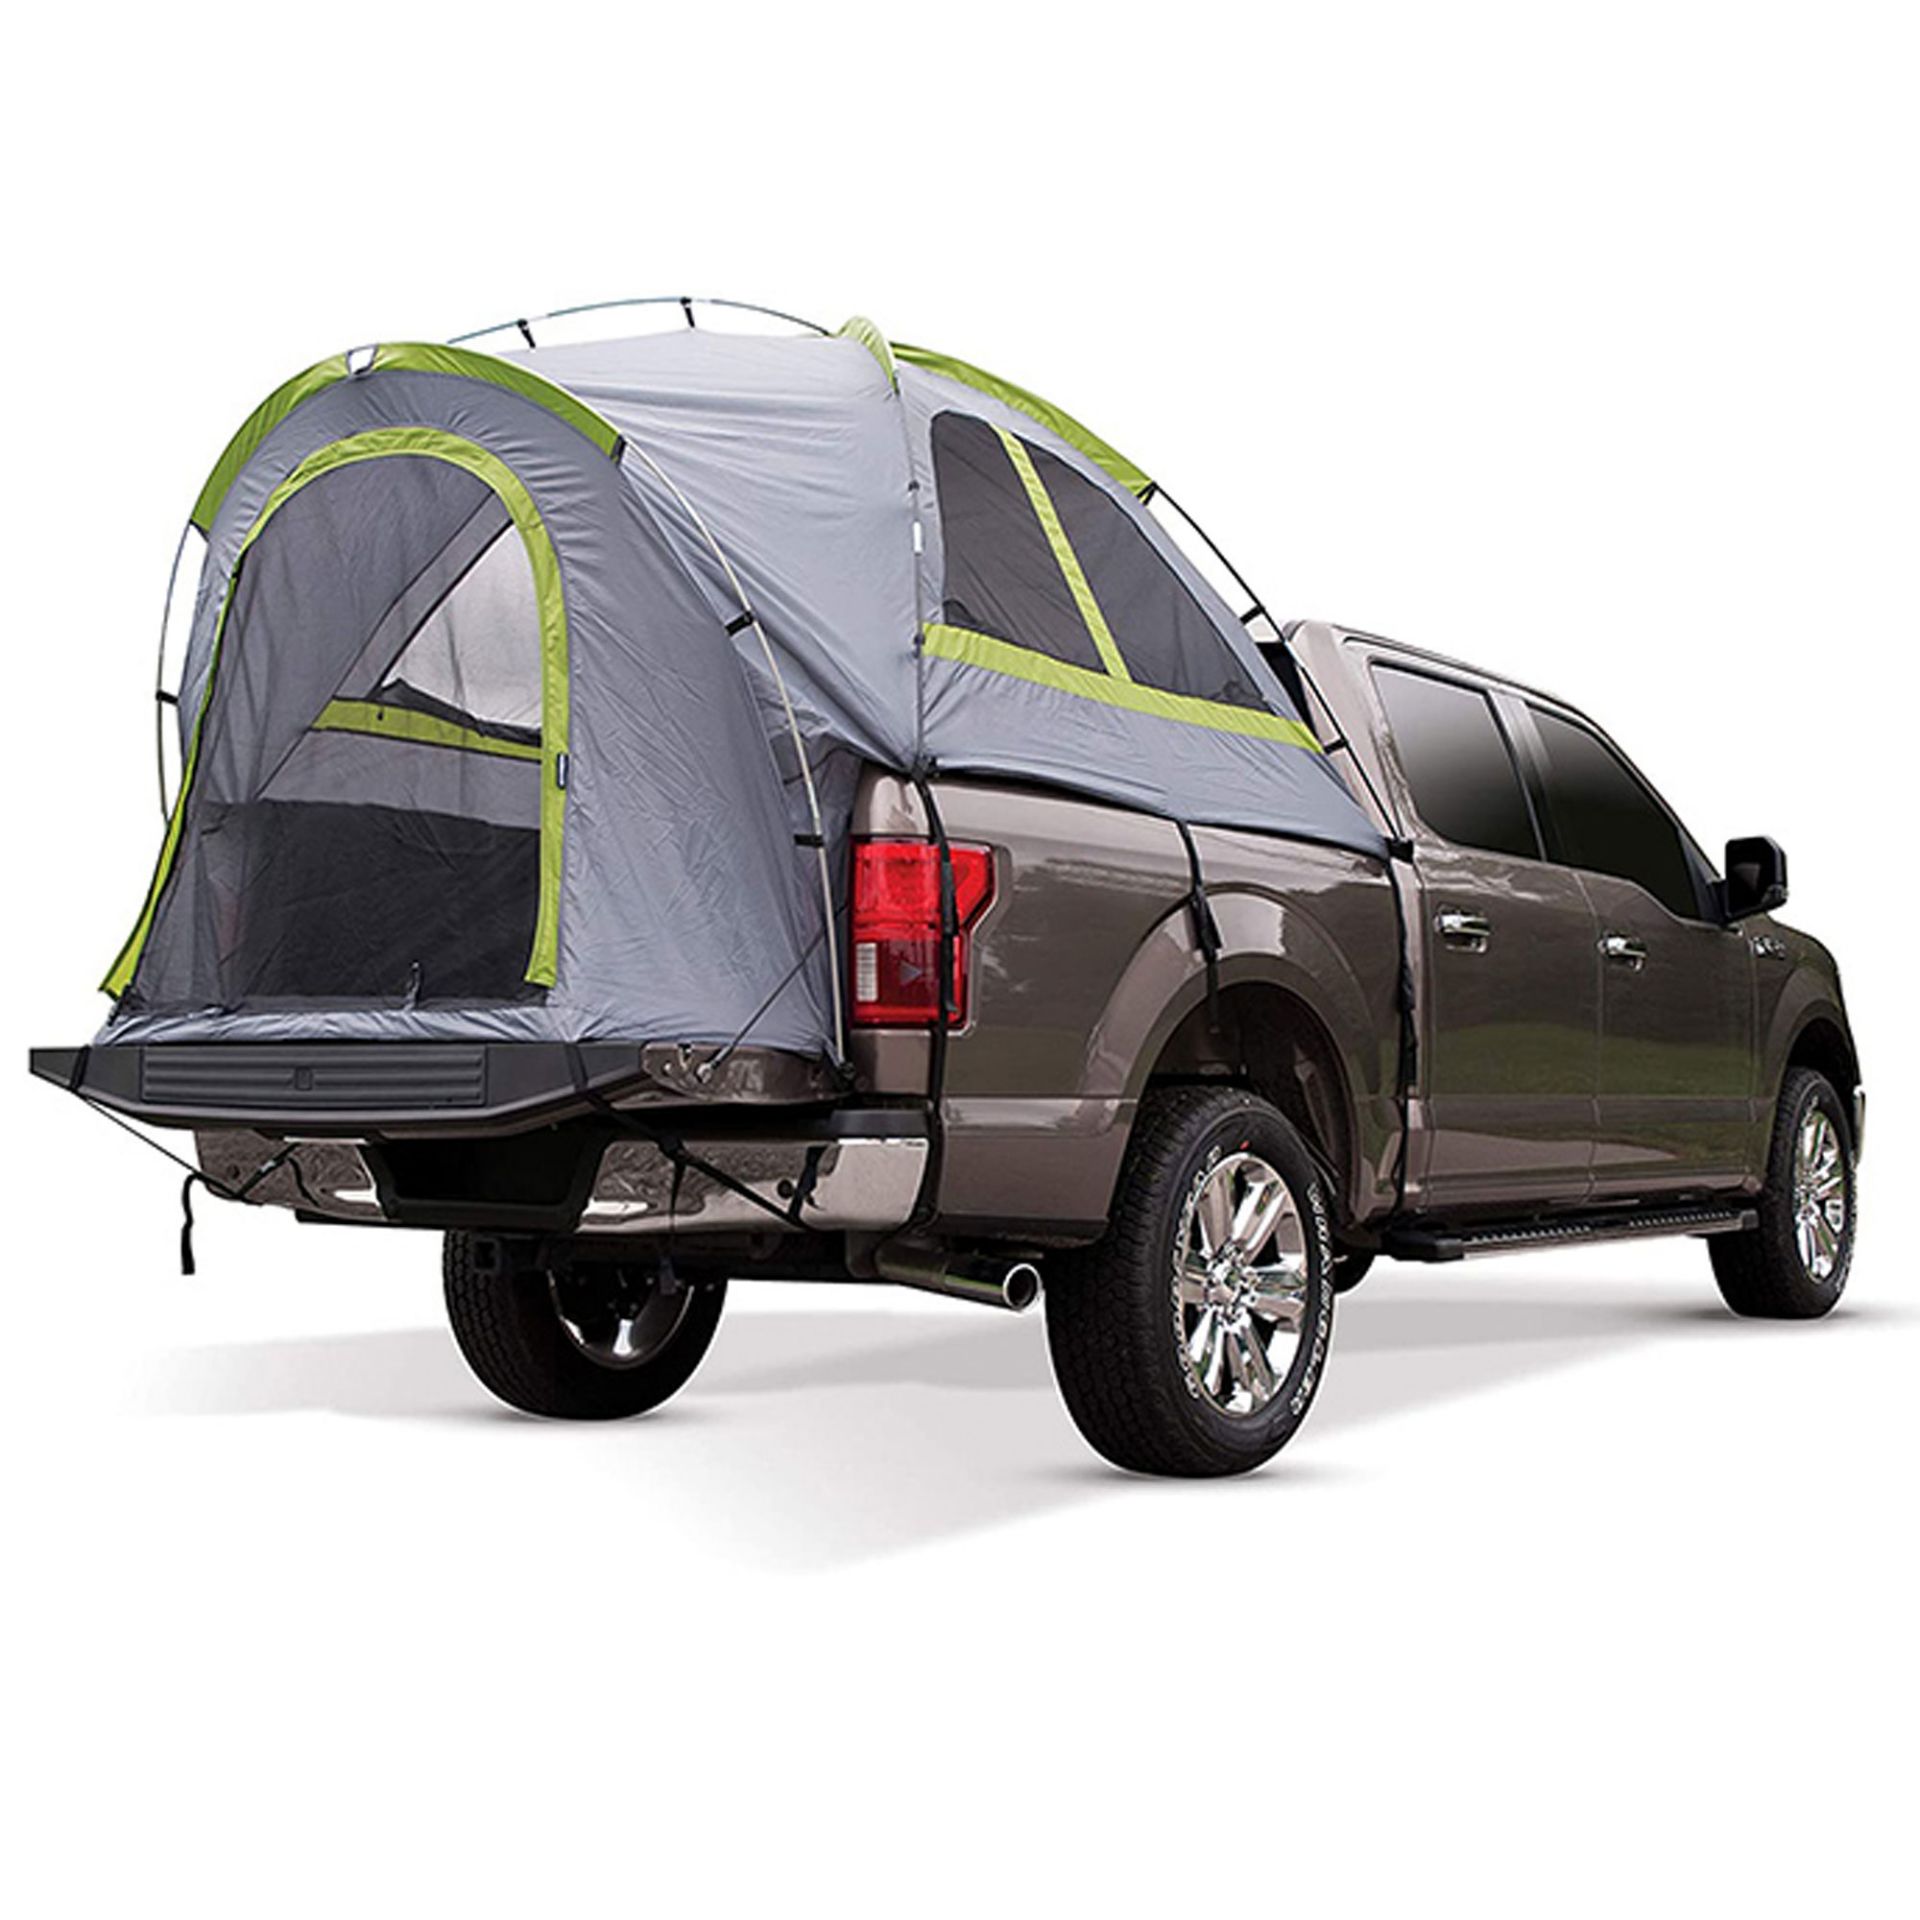 RBSM MEDIUM TRUCK CAMPING TENT W/ RAINFLY (NEW) (MSRP $280) - Image 2 of 6